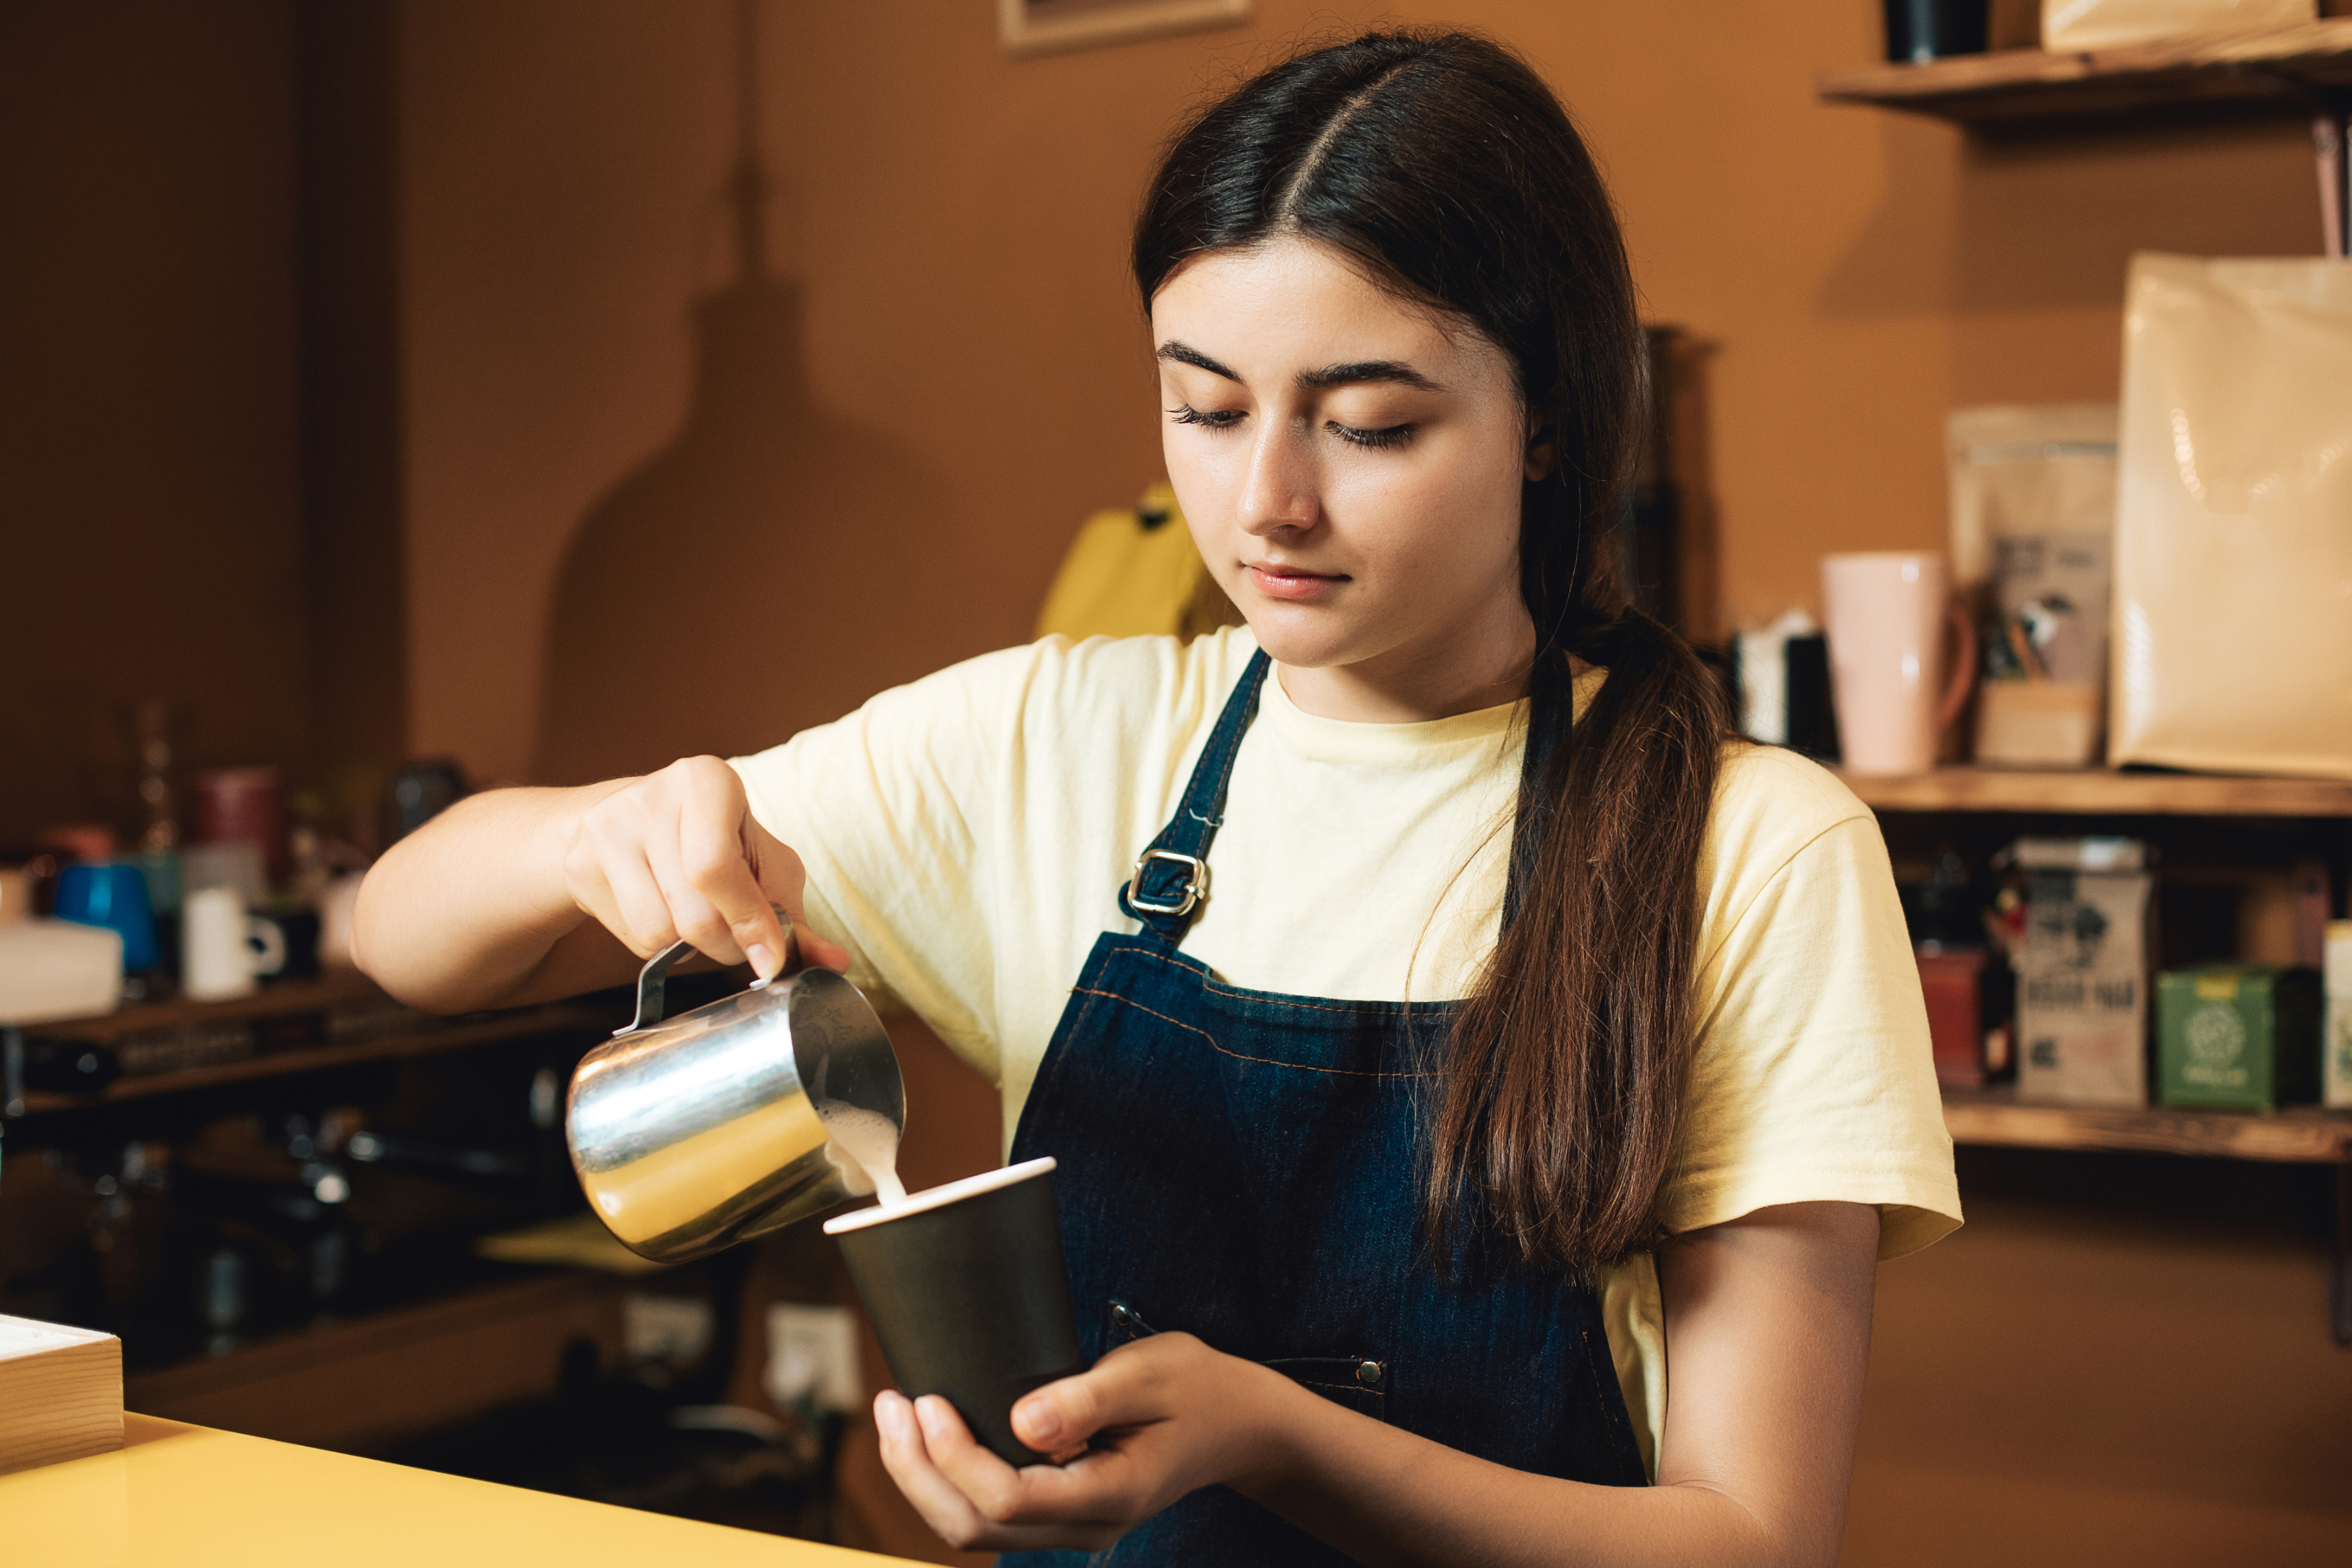 A barista working behind the counter